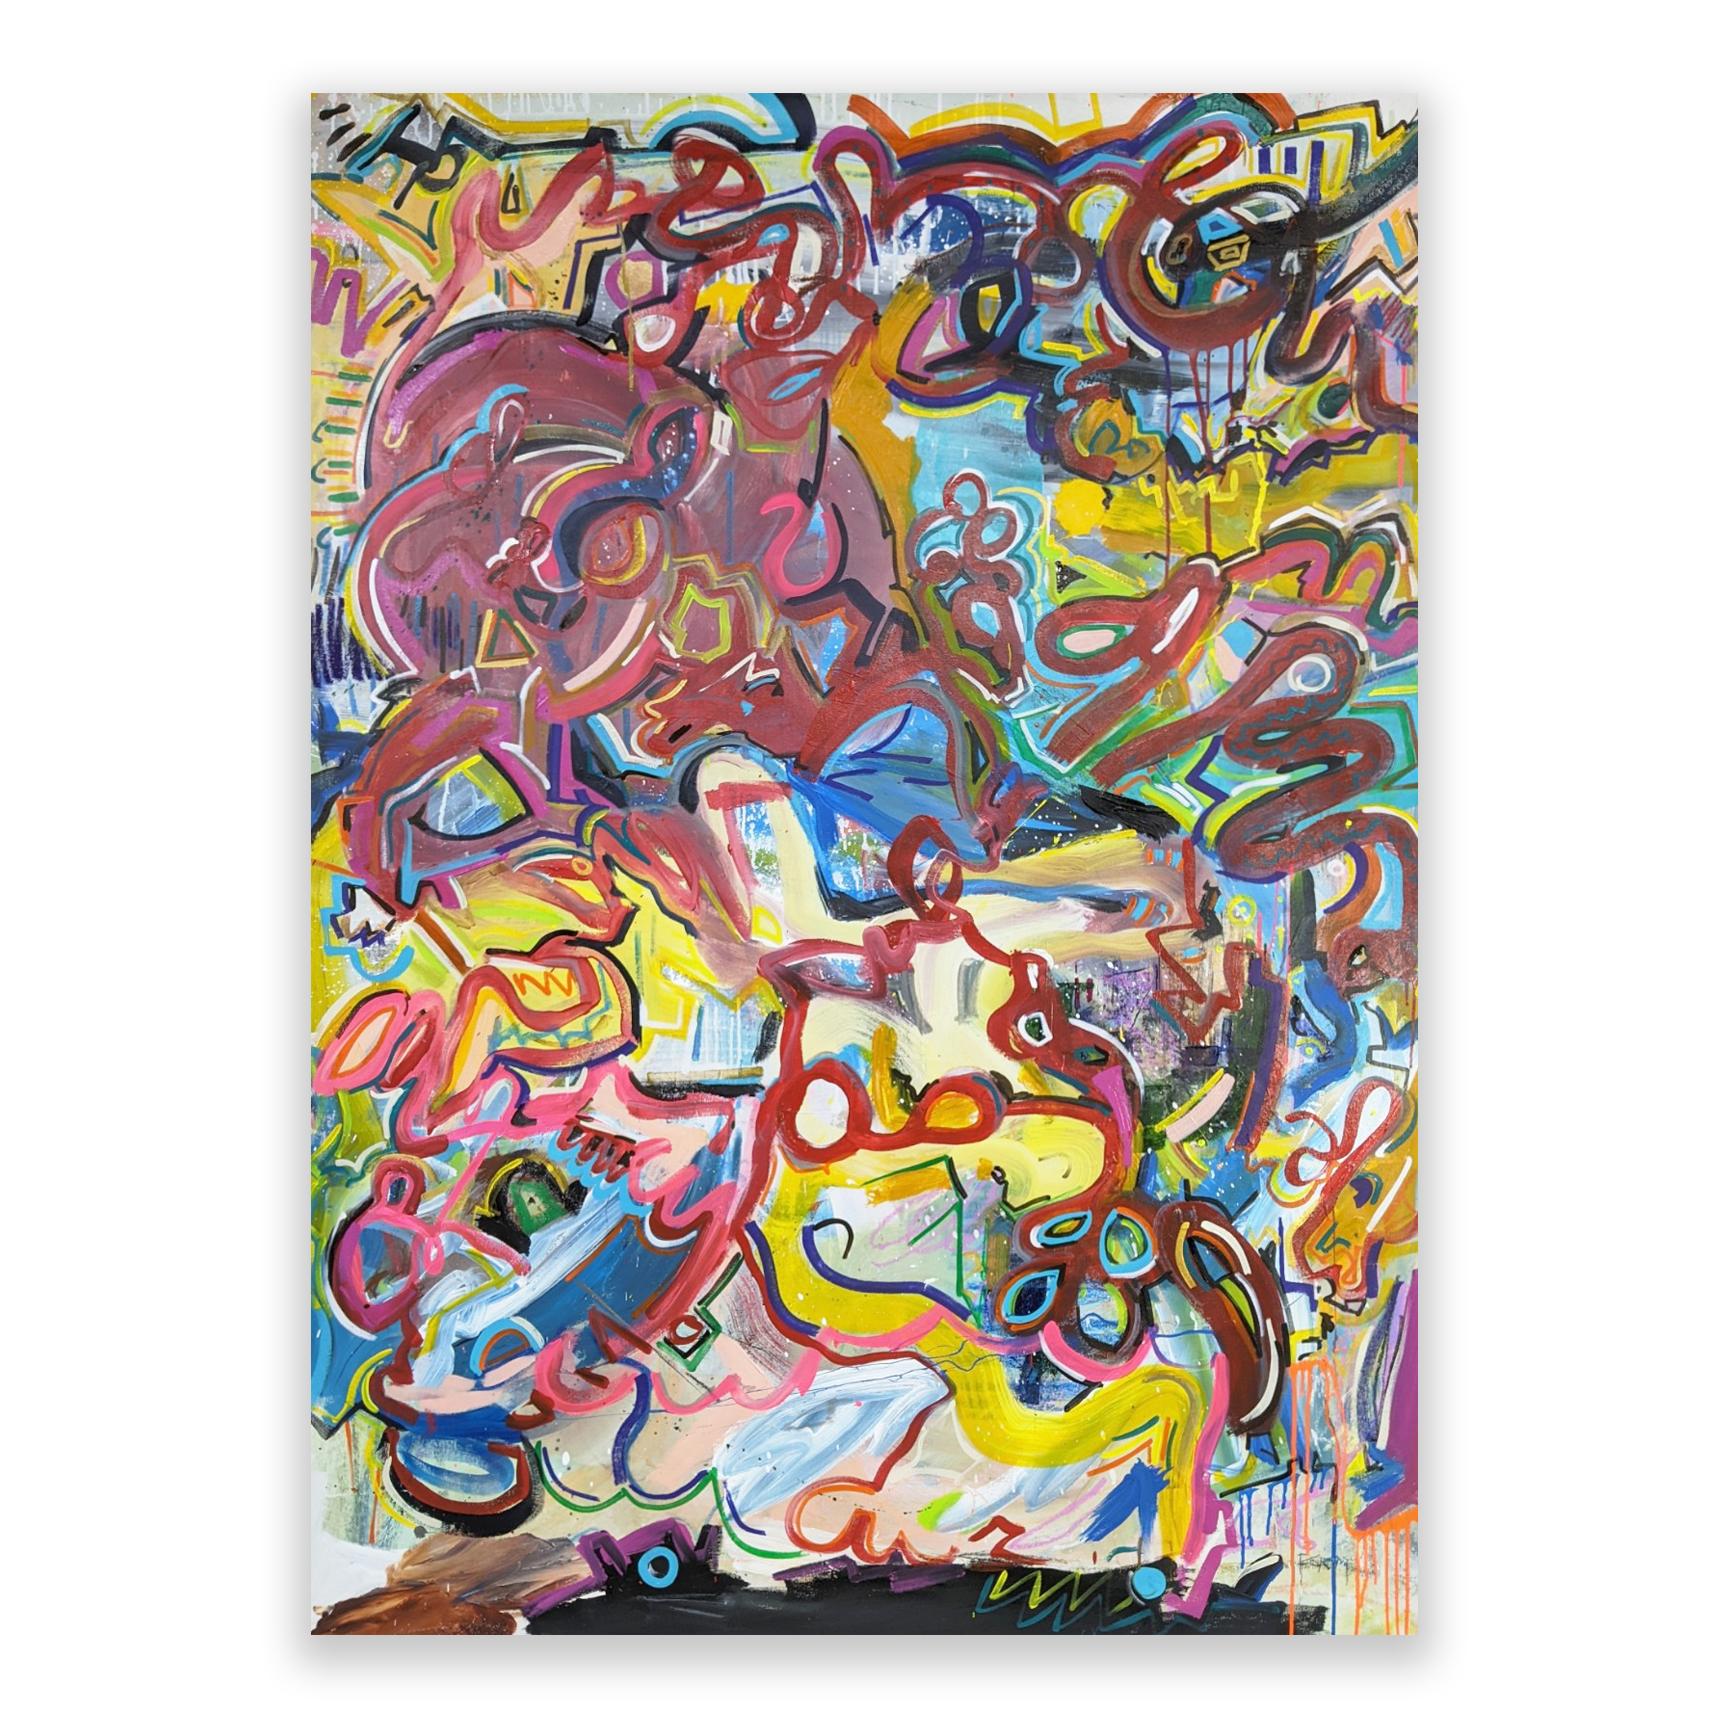 Pulpo 2 by Joseph Conrad-Ferm, 2022
Mixed Media 
68 × 51 in 
172.7 × 129.54 cm

Mixed media abstract painting on canvas by NY-based artist Joseph Conrad-Ferm. 

Shipping is not included. See our shipping policies. Please contact us for shipping